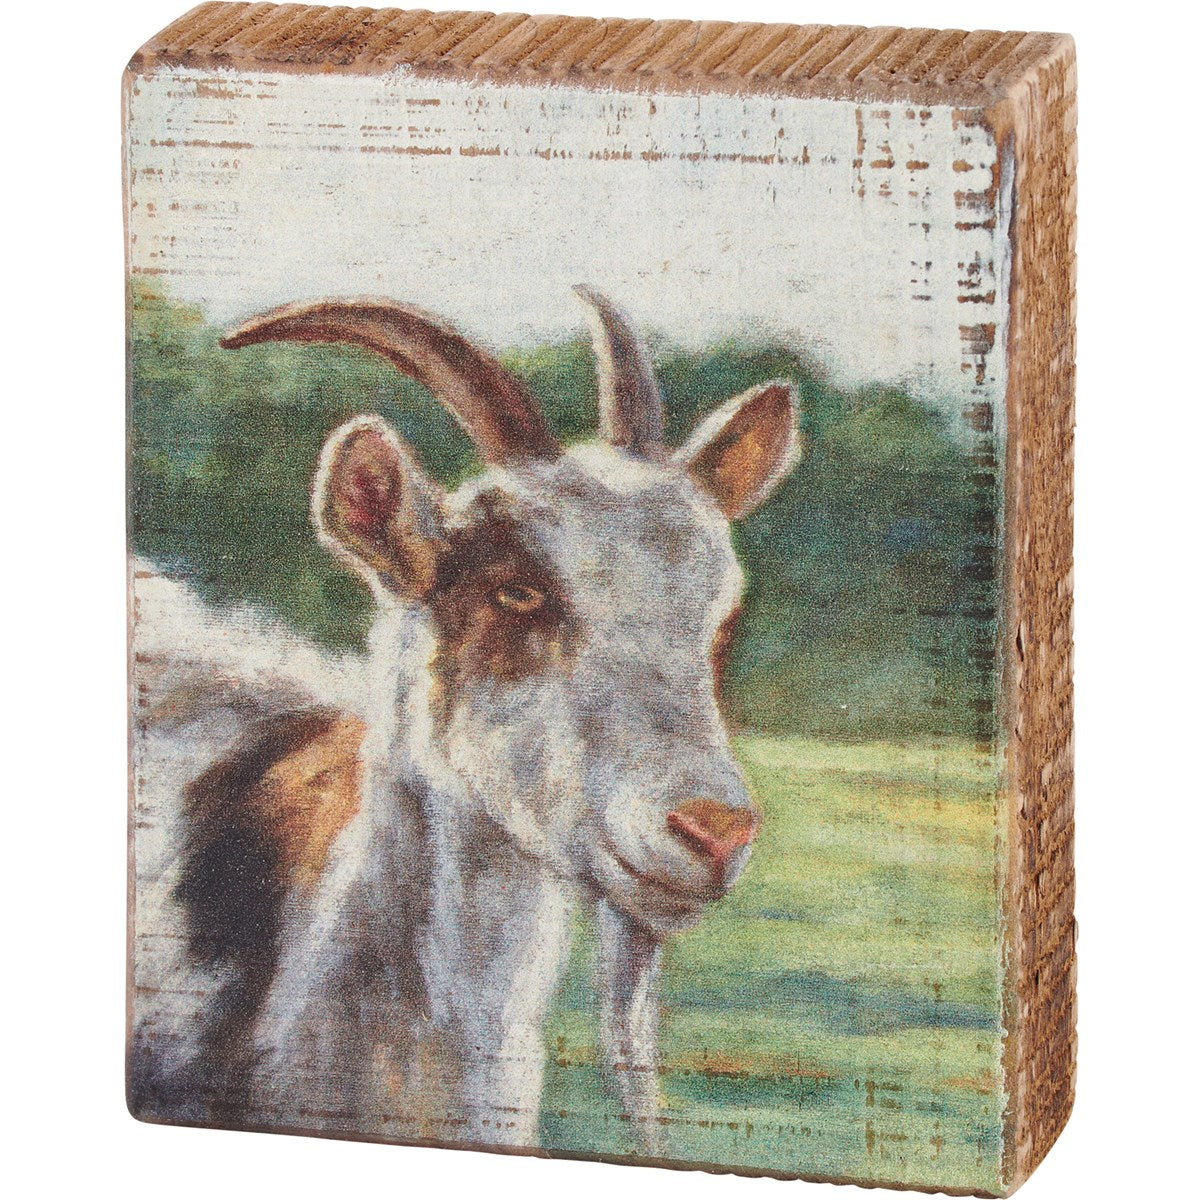 Brown And White Goat 5" Wooden Block Sign